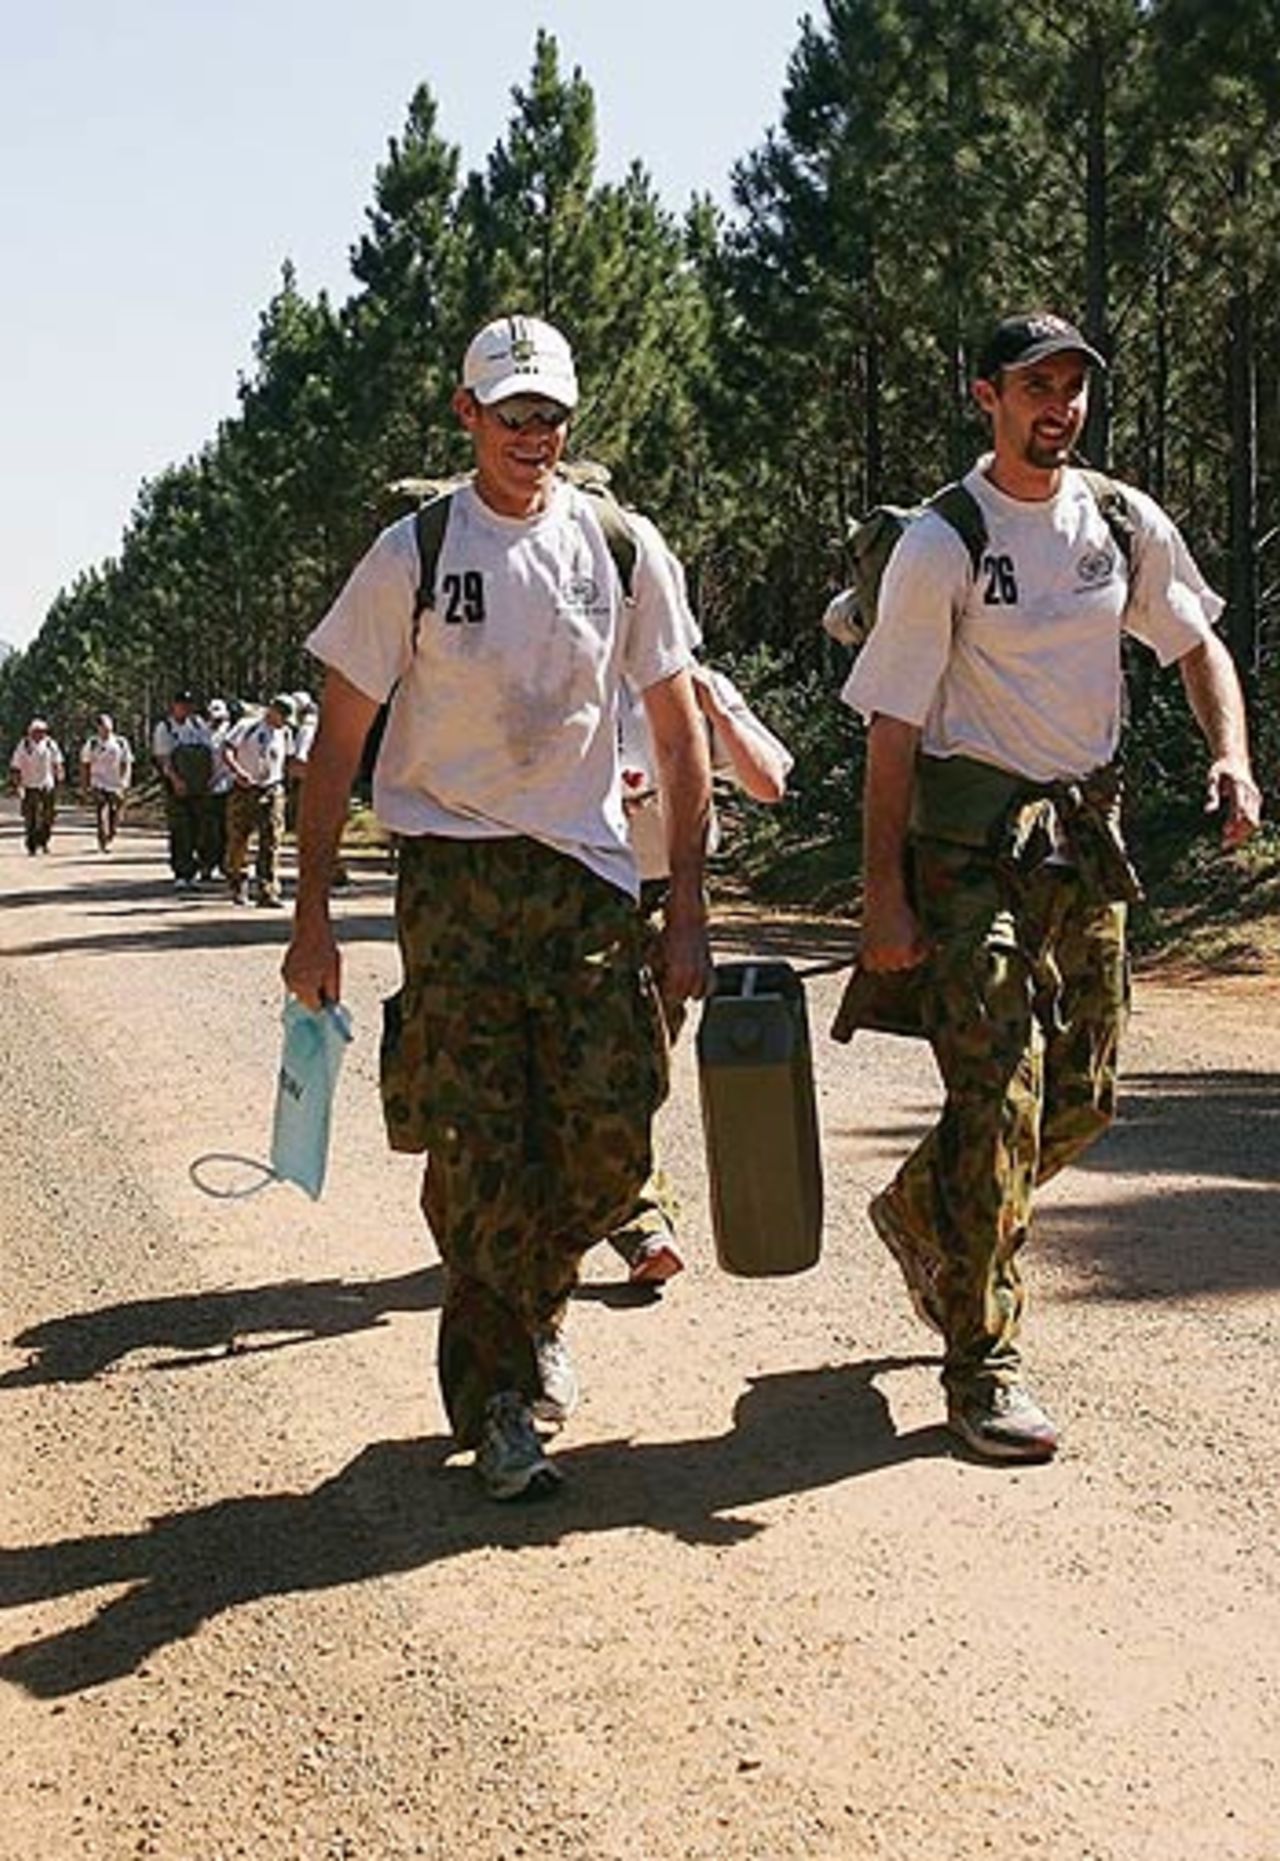 John Buchanan and Jason Gillespie share the burden during an outback boot camp in the Beerwah State Forest, Brisbane, August 23, 2006